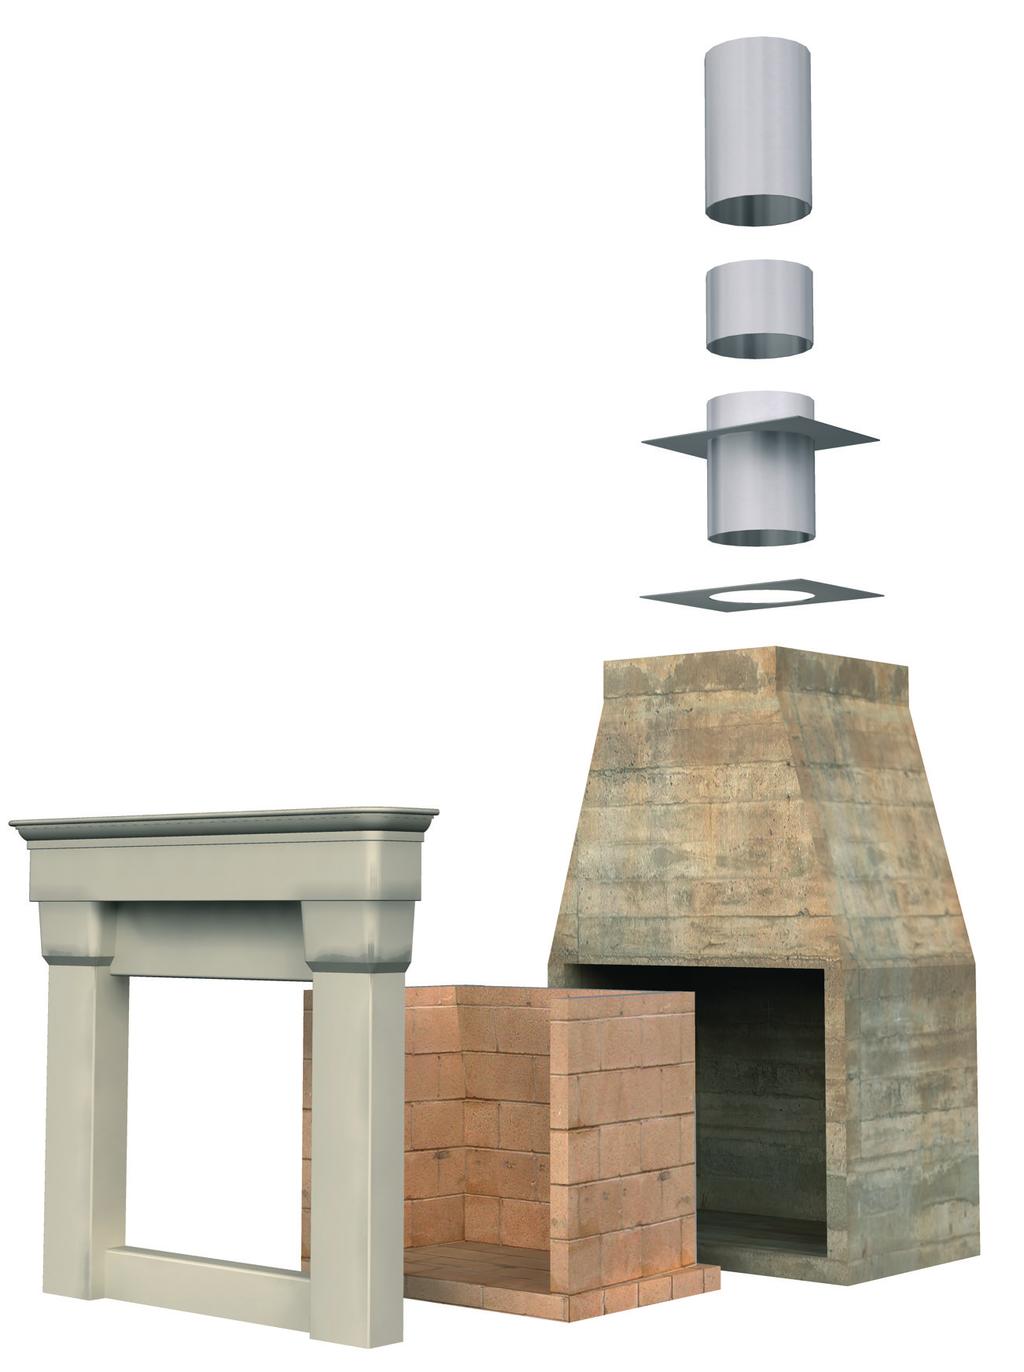 firebox or chimney component produced measures up to the highest of standards for weight, heat transfer,